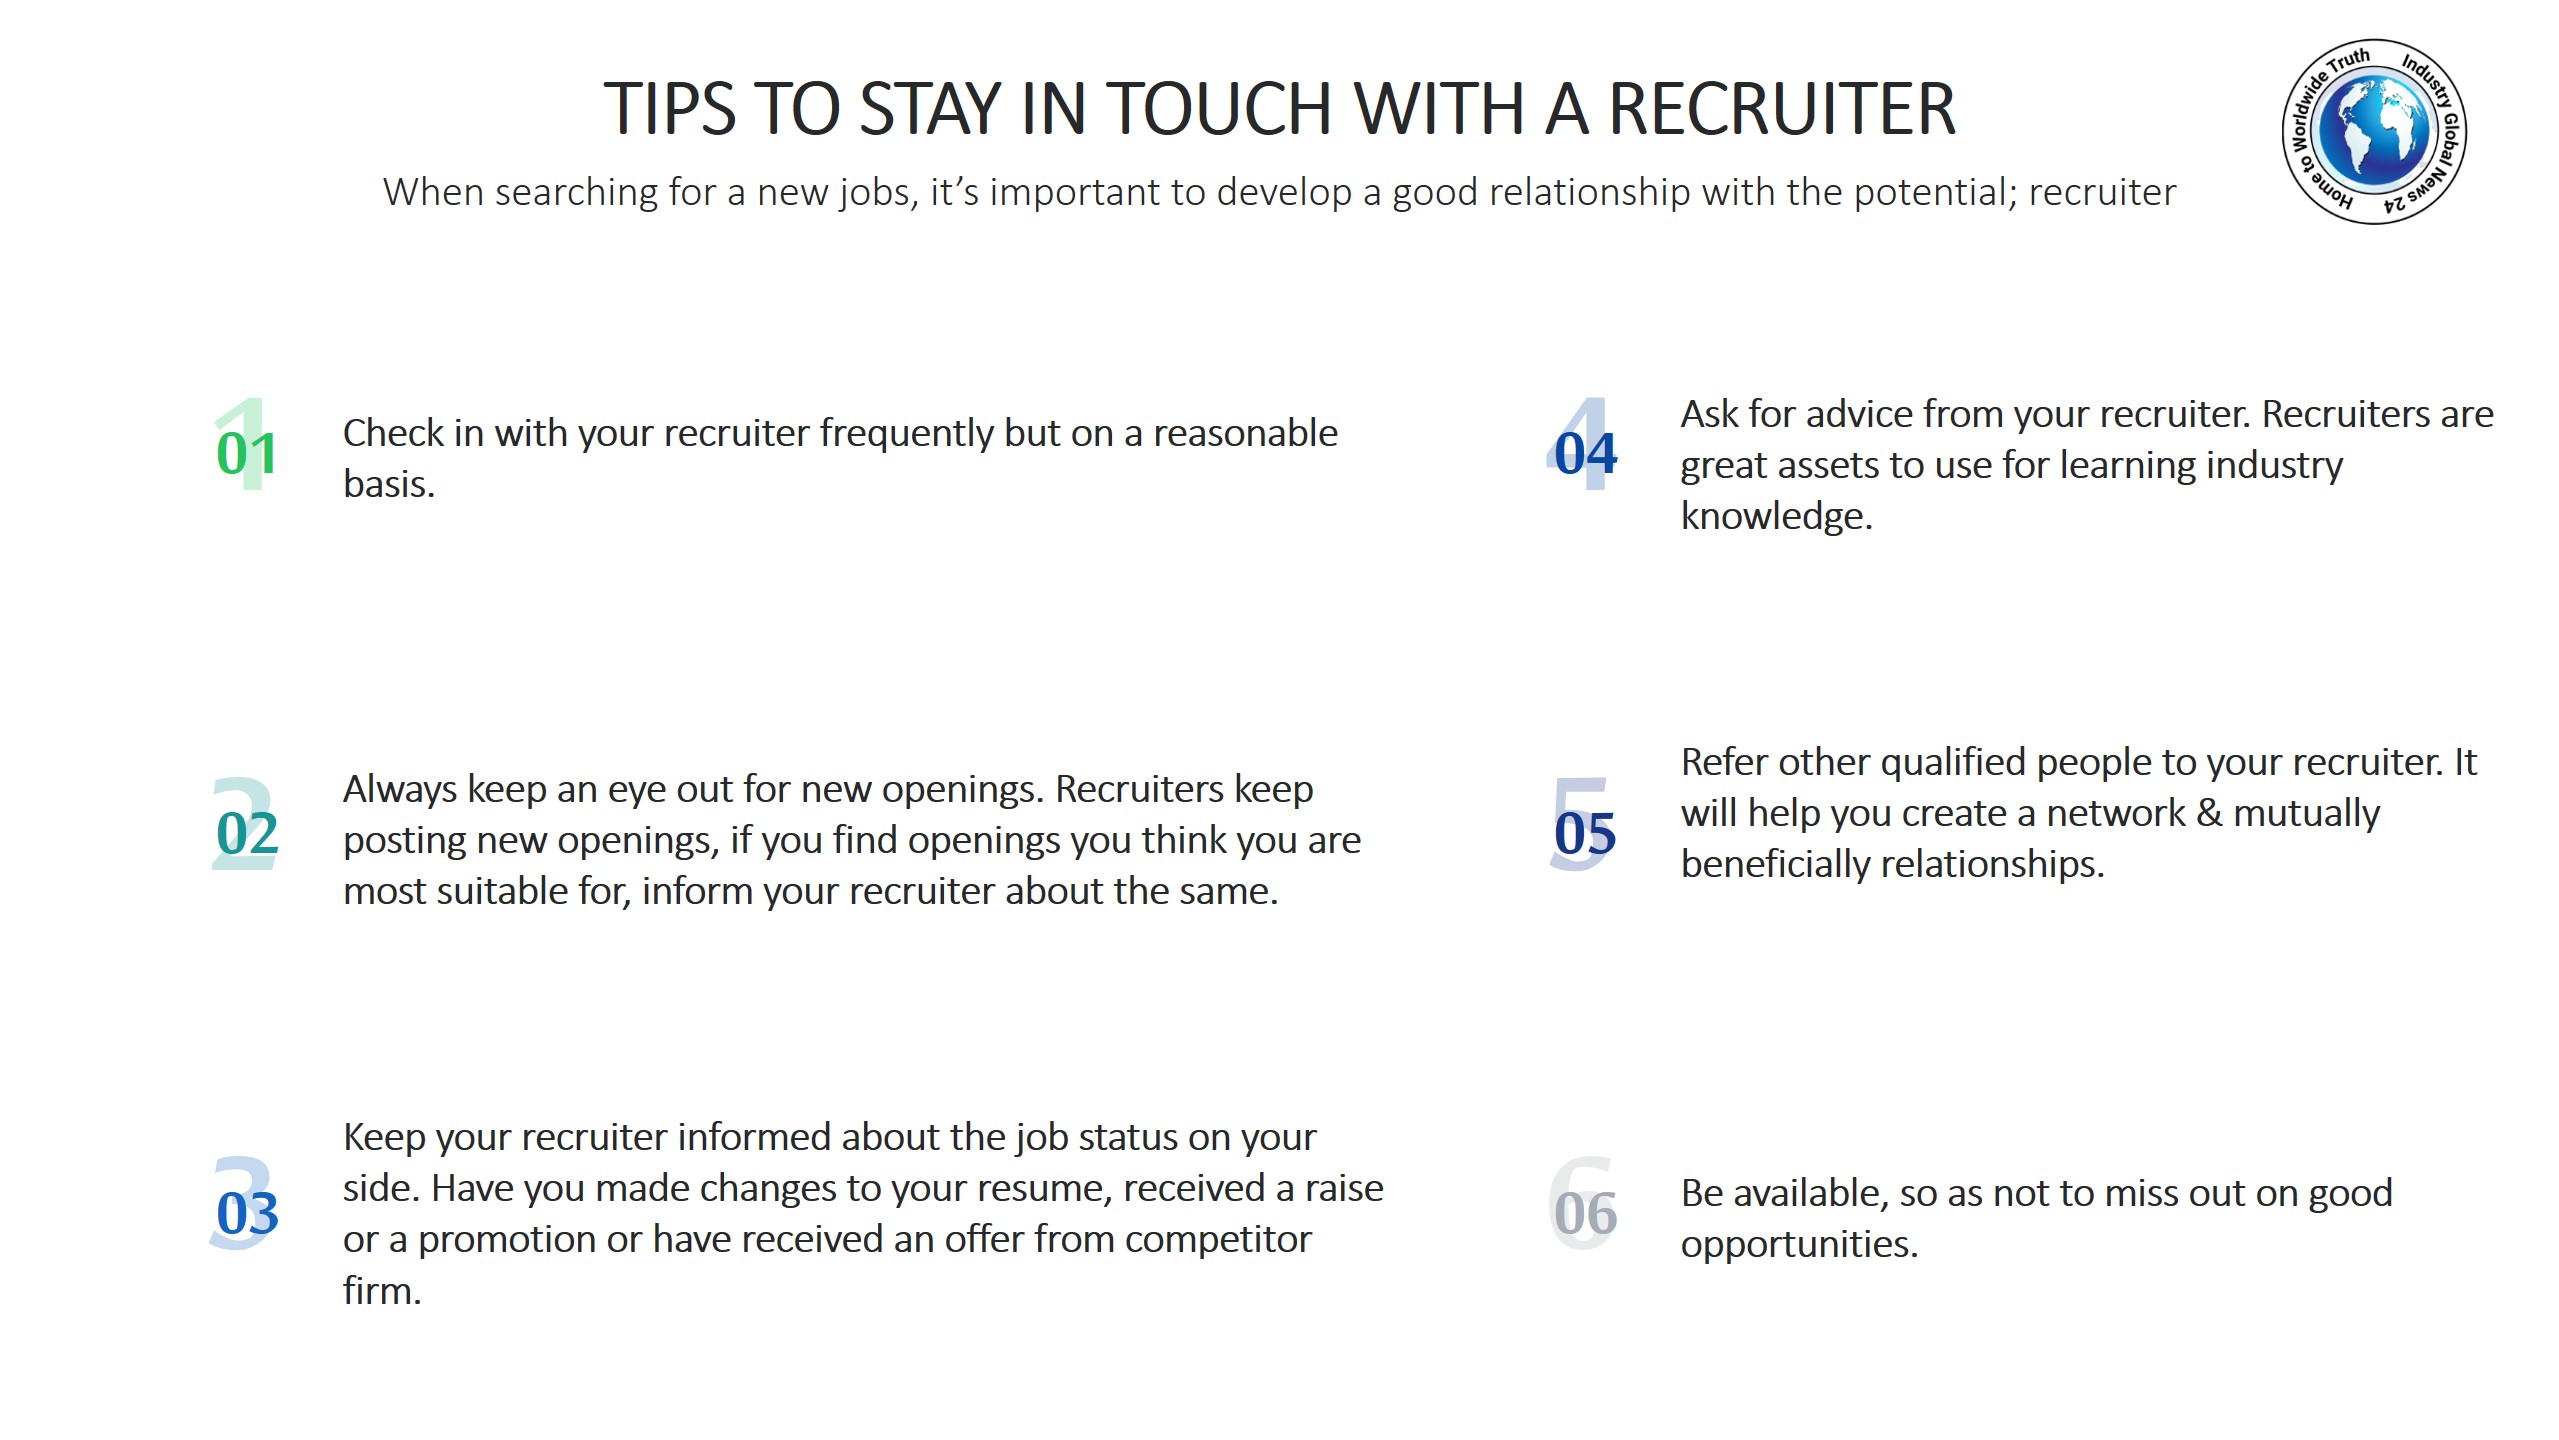 Tips to stay in touch with a recruiter